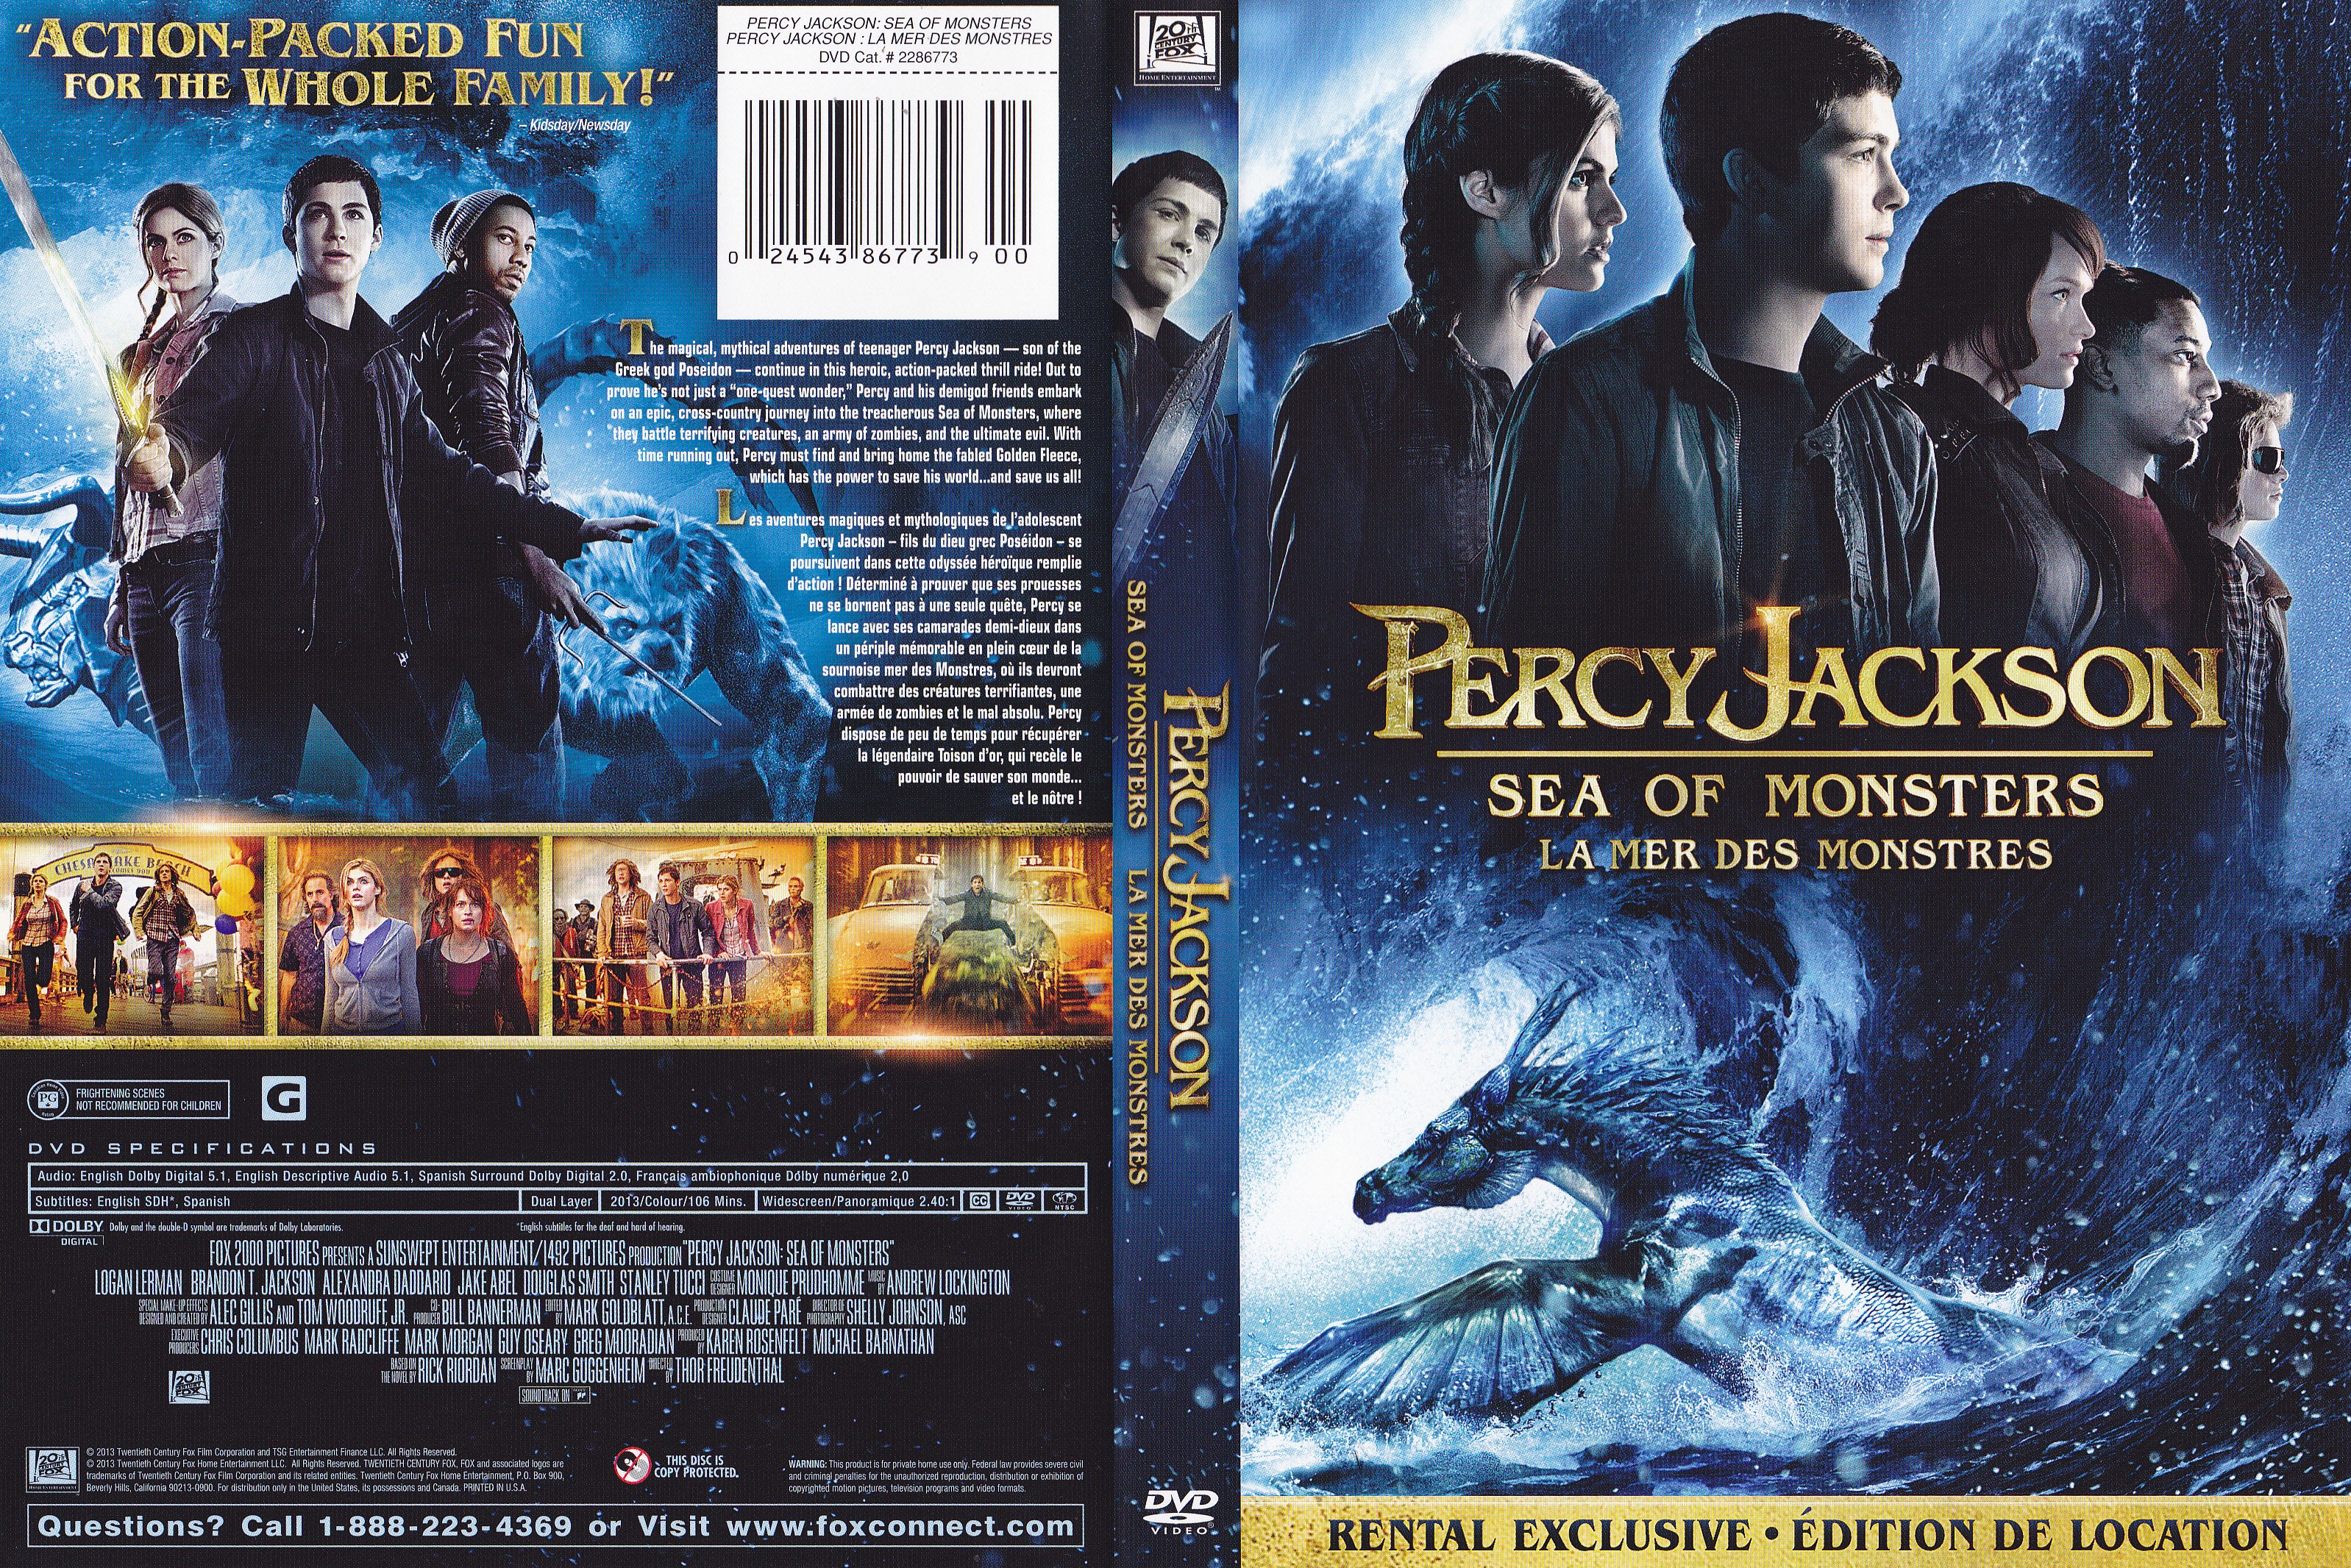 Jaquette DVD Percy Jackson sea of monsters - Percy jackson la mer des monstres (Canadienne)